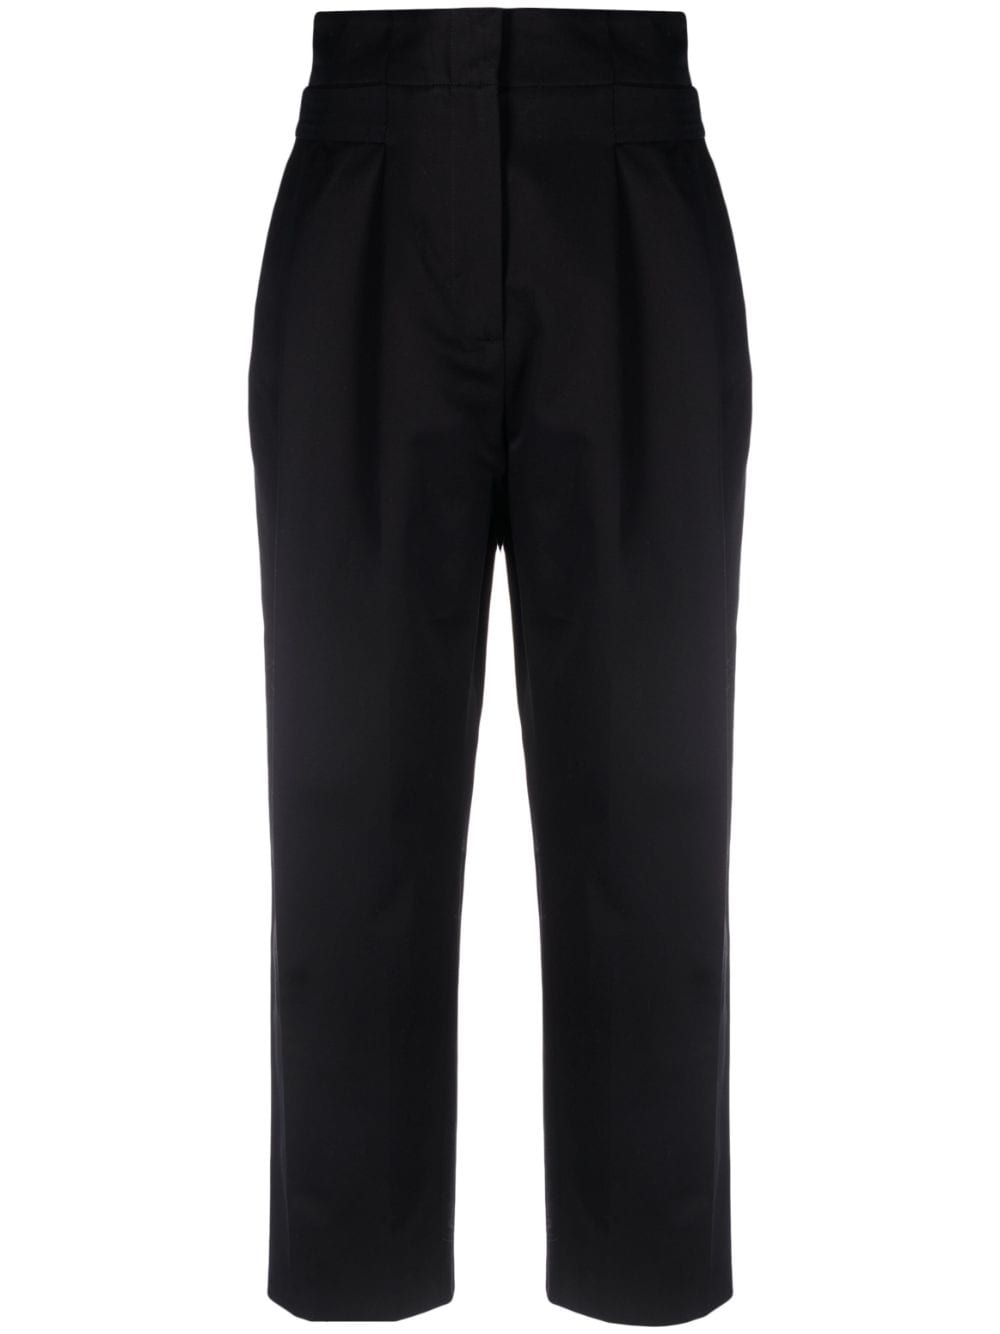 TOTEME pleat-detail high-waisted trousers - Black von TOTEME